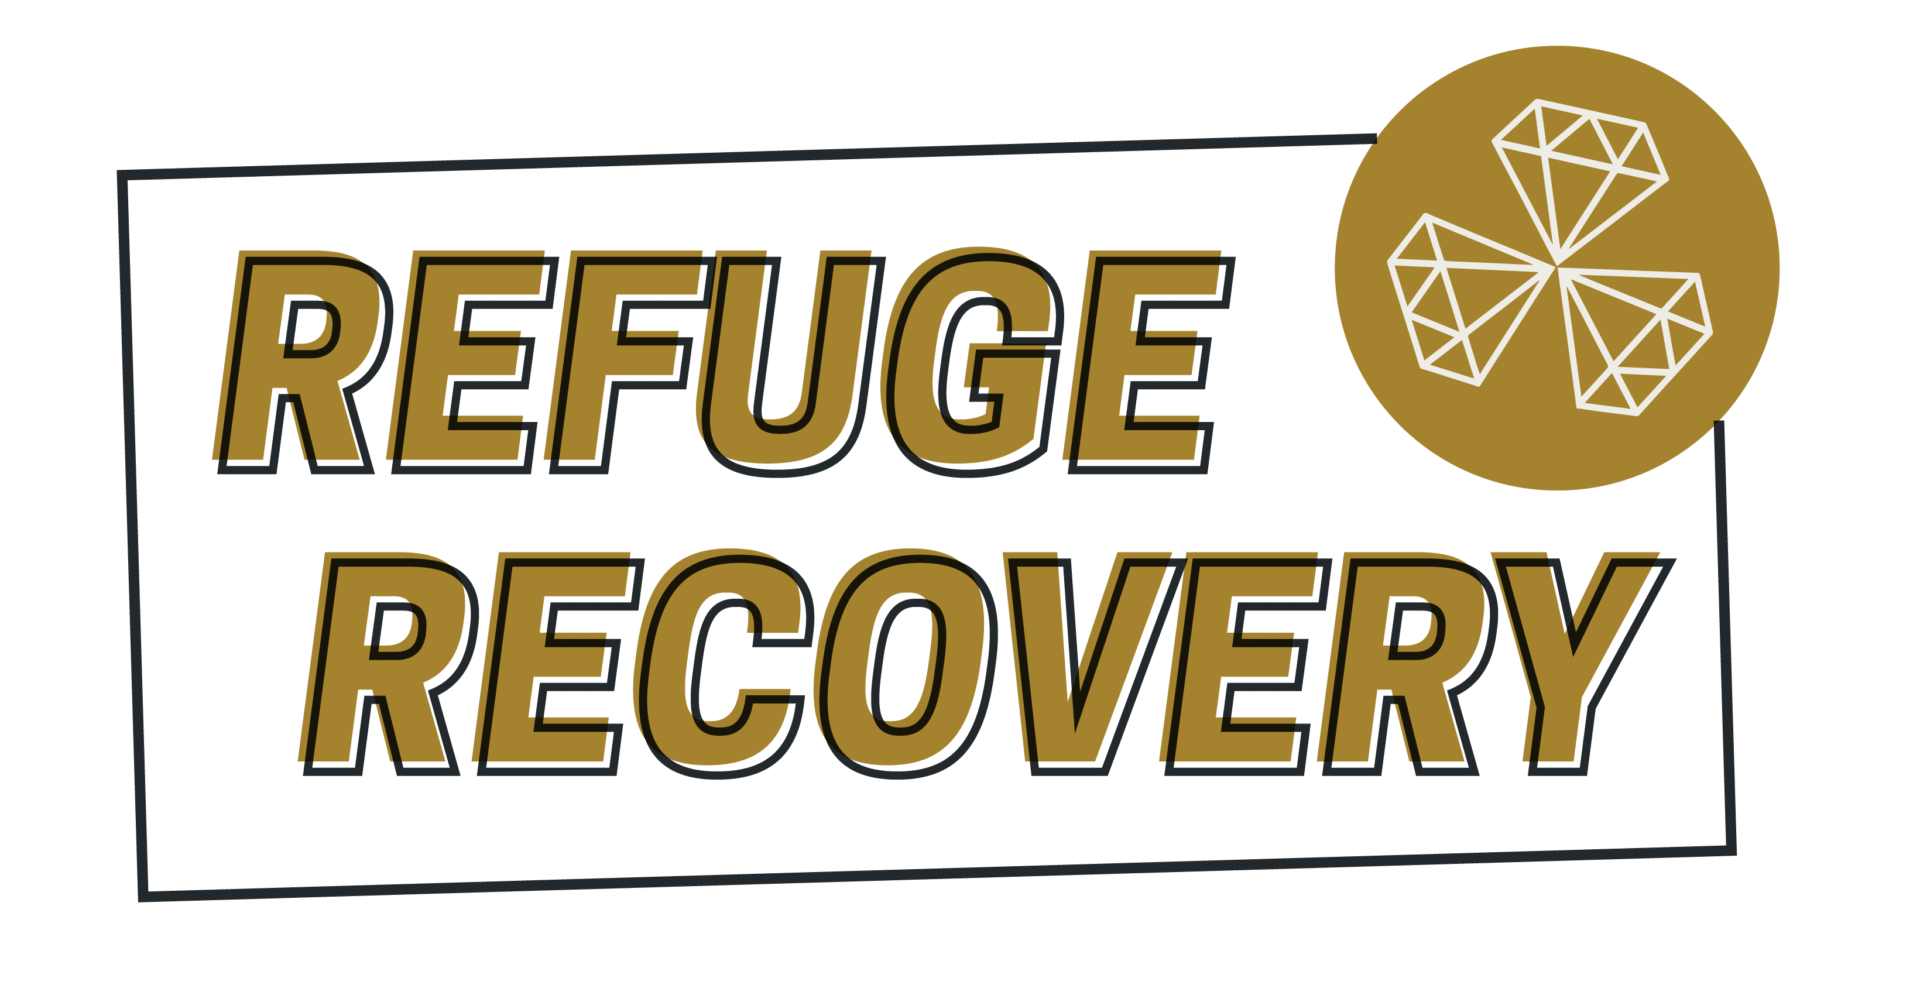 Recovery Logo - A Buddhist Inspired Path to Recovery from Addiction